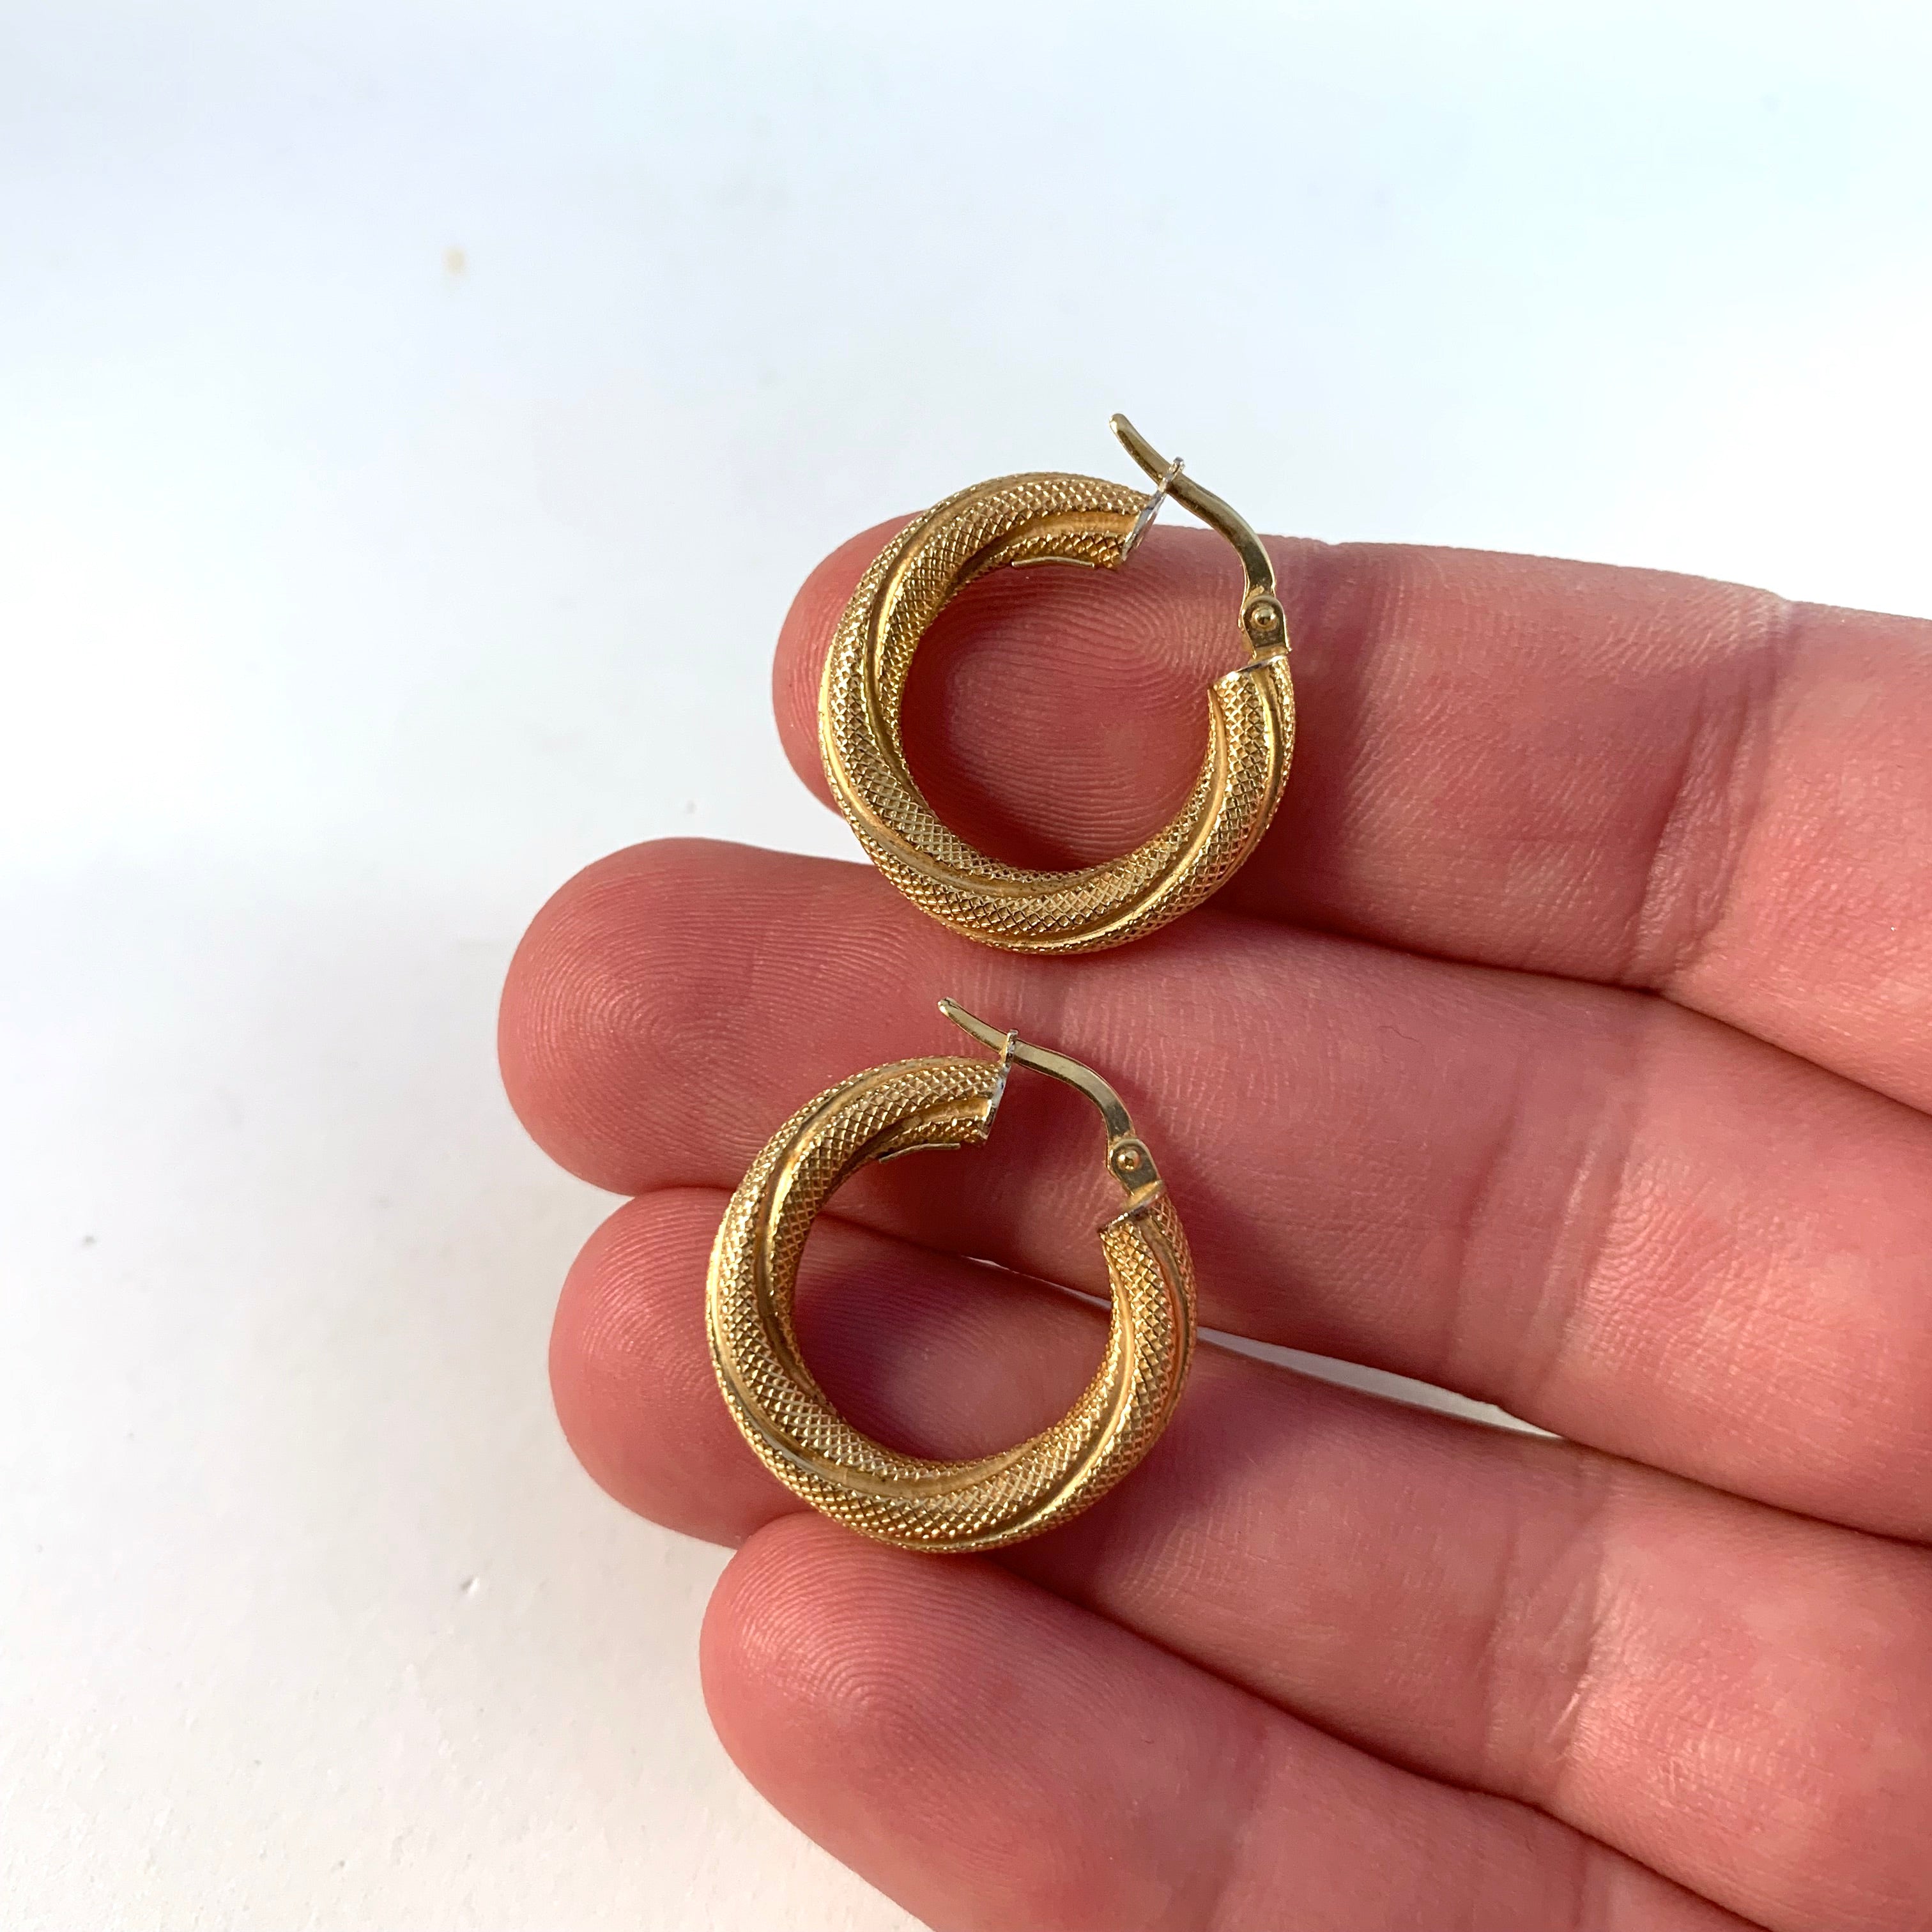 Uno A Erre, Arezzo Italy Vintage 18k Gold Huggie Earrings. Also marked BREV.